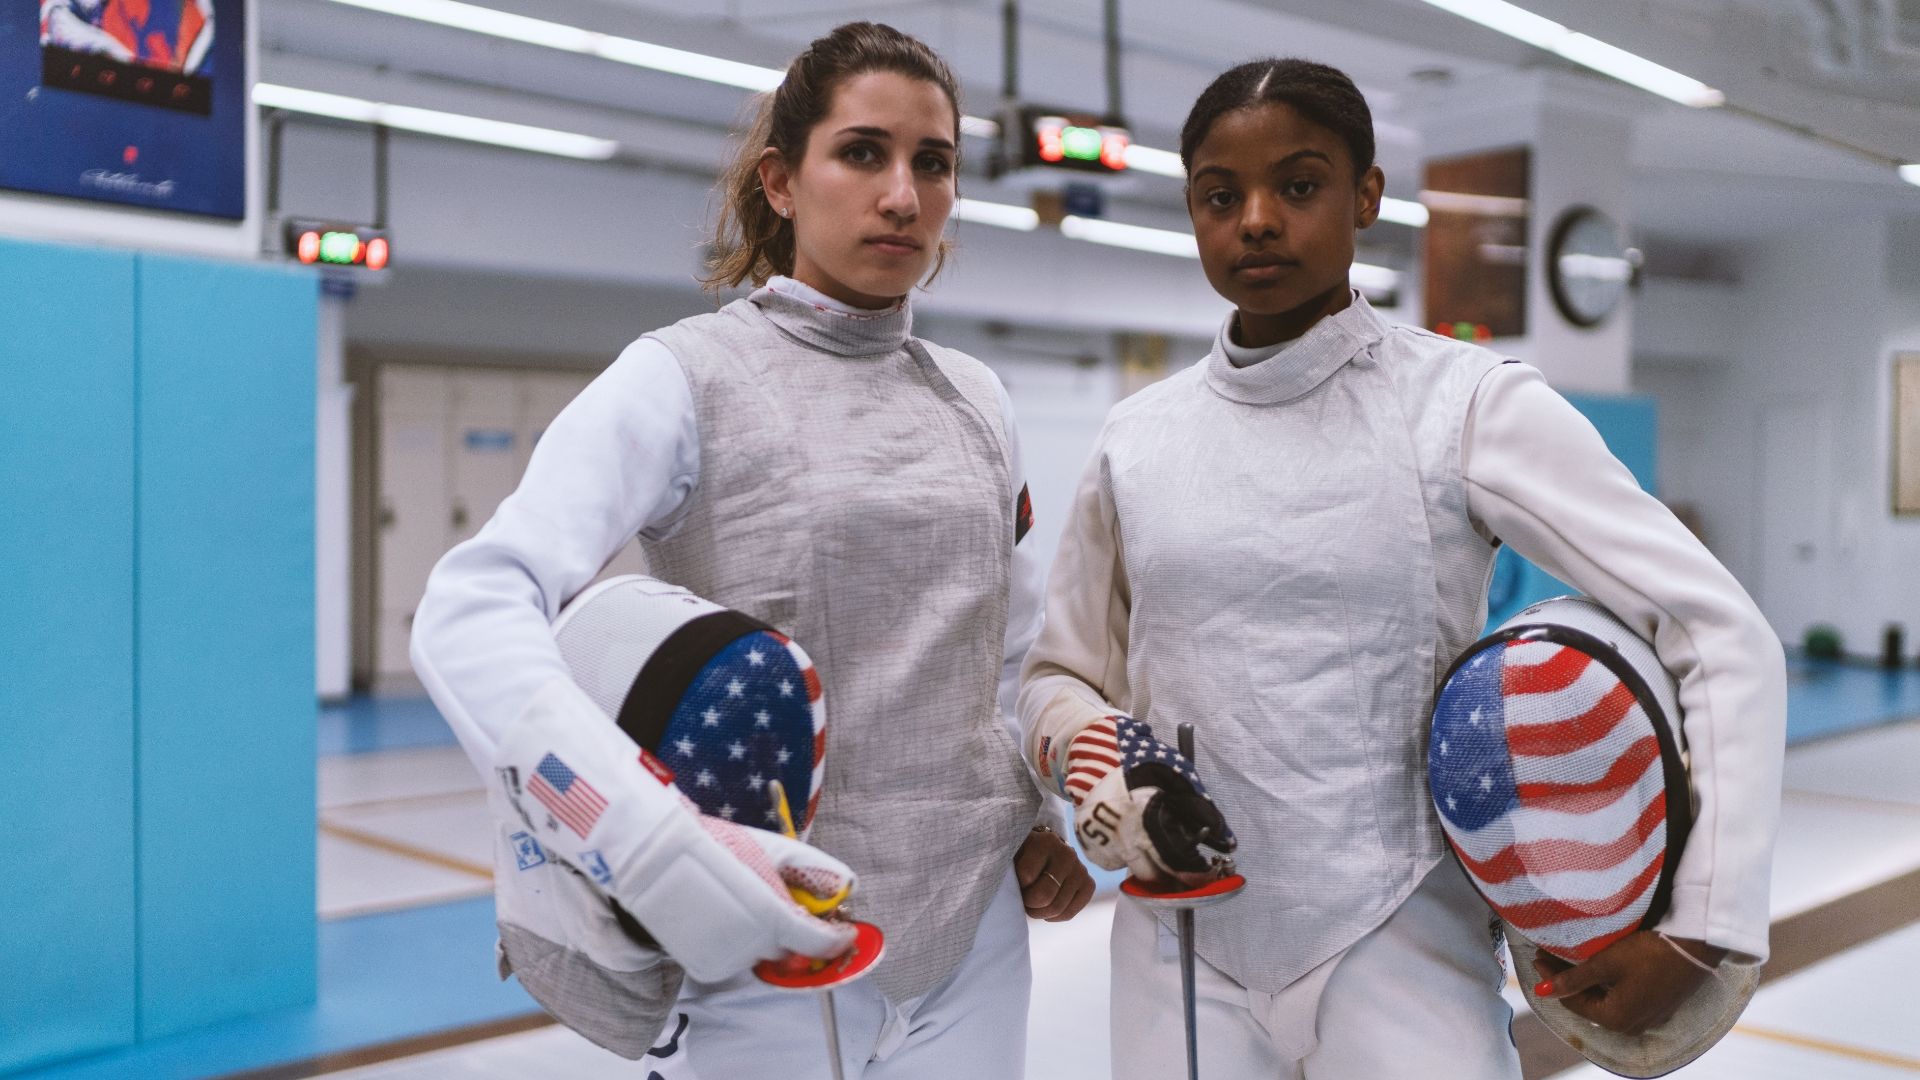 2 women fencers posing together in full protective gear with helmets off